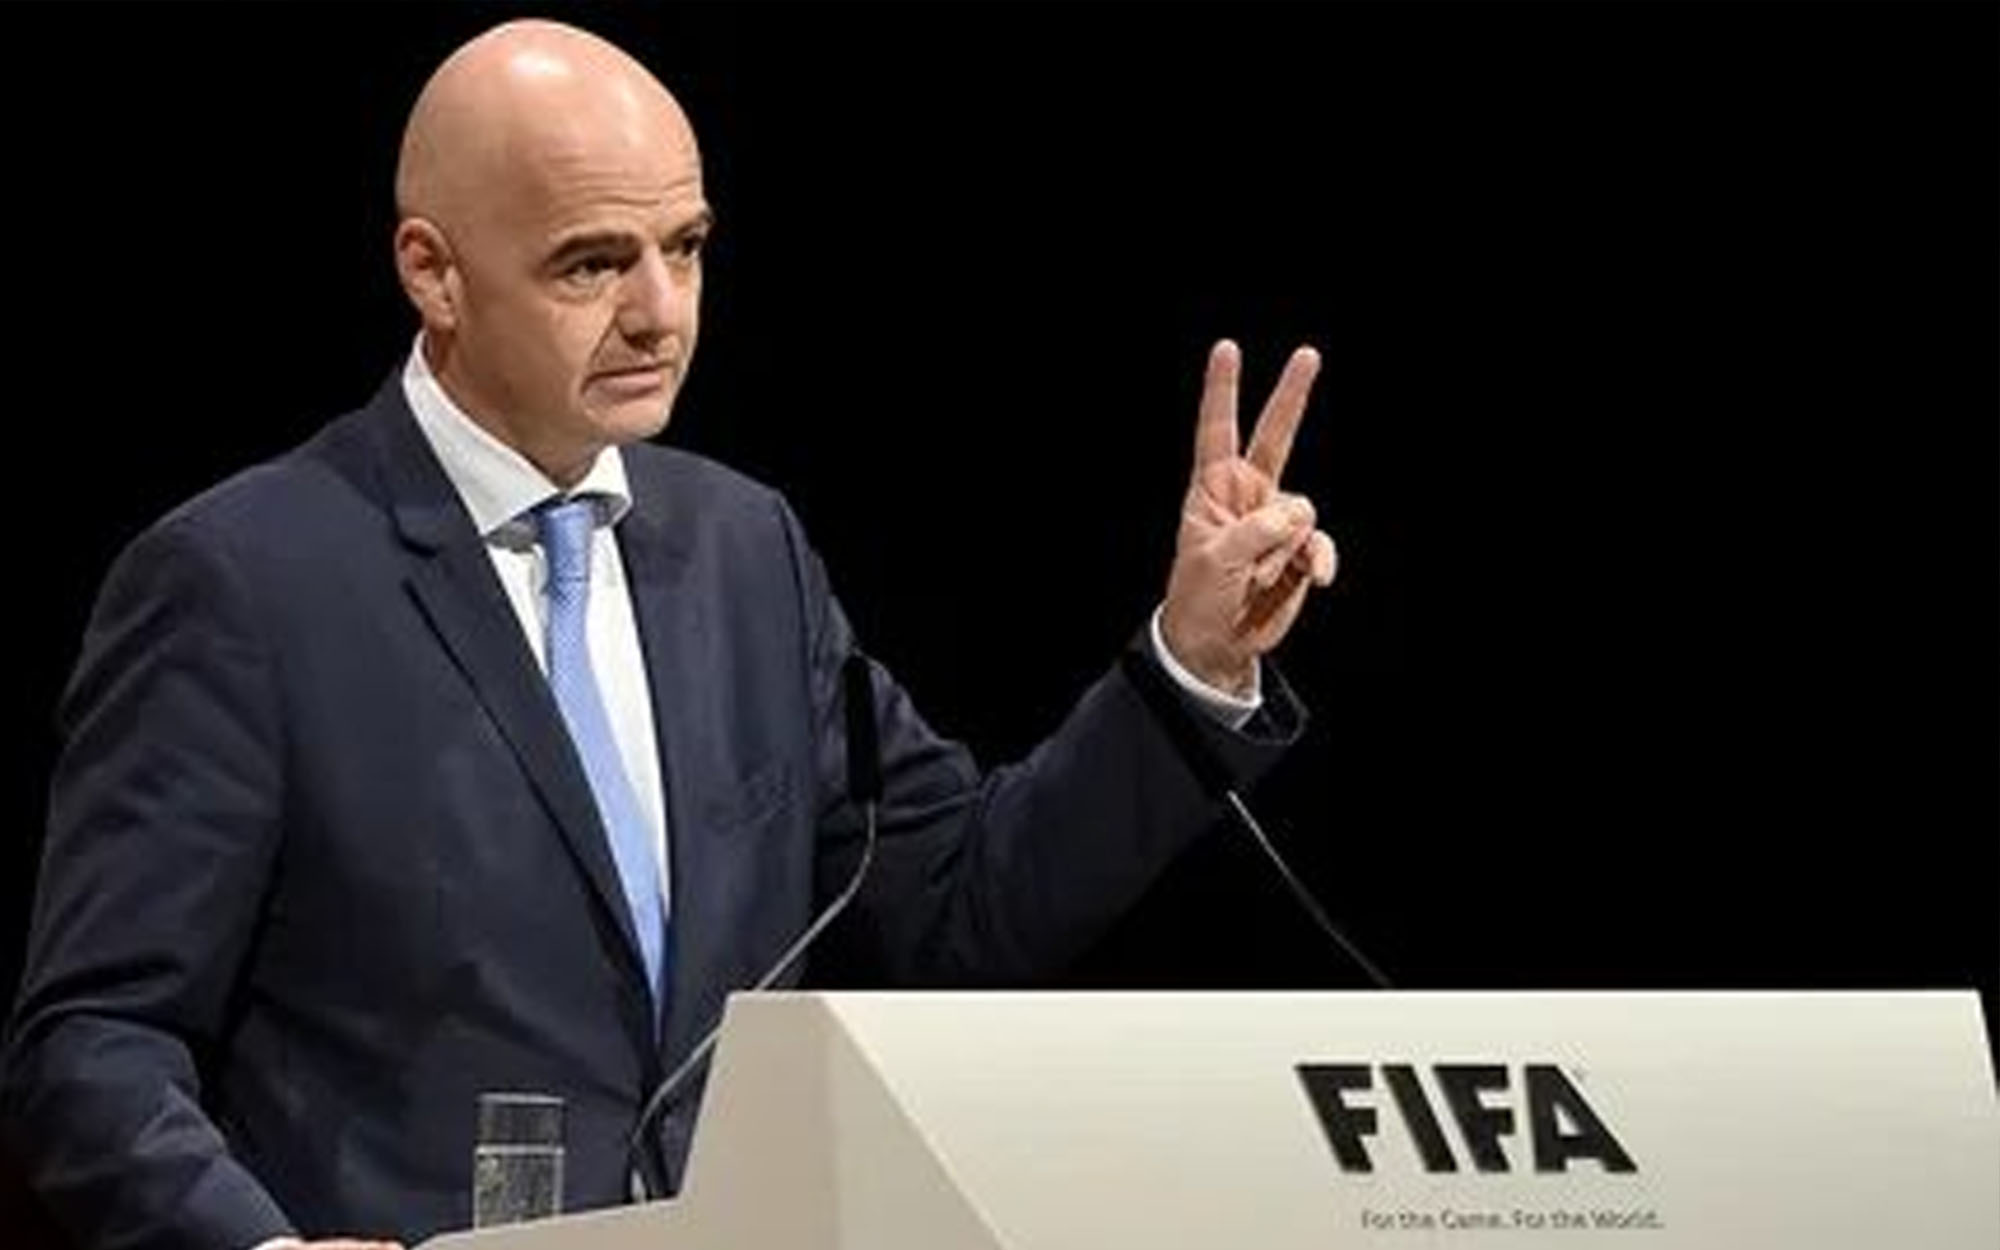 Gianni Infantino has been re-elected as president of the International Football Federation (FIFA).